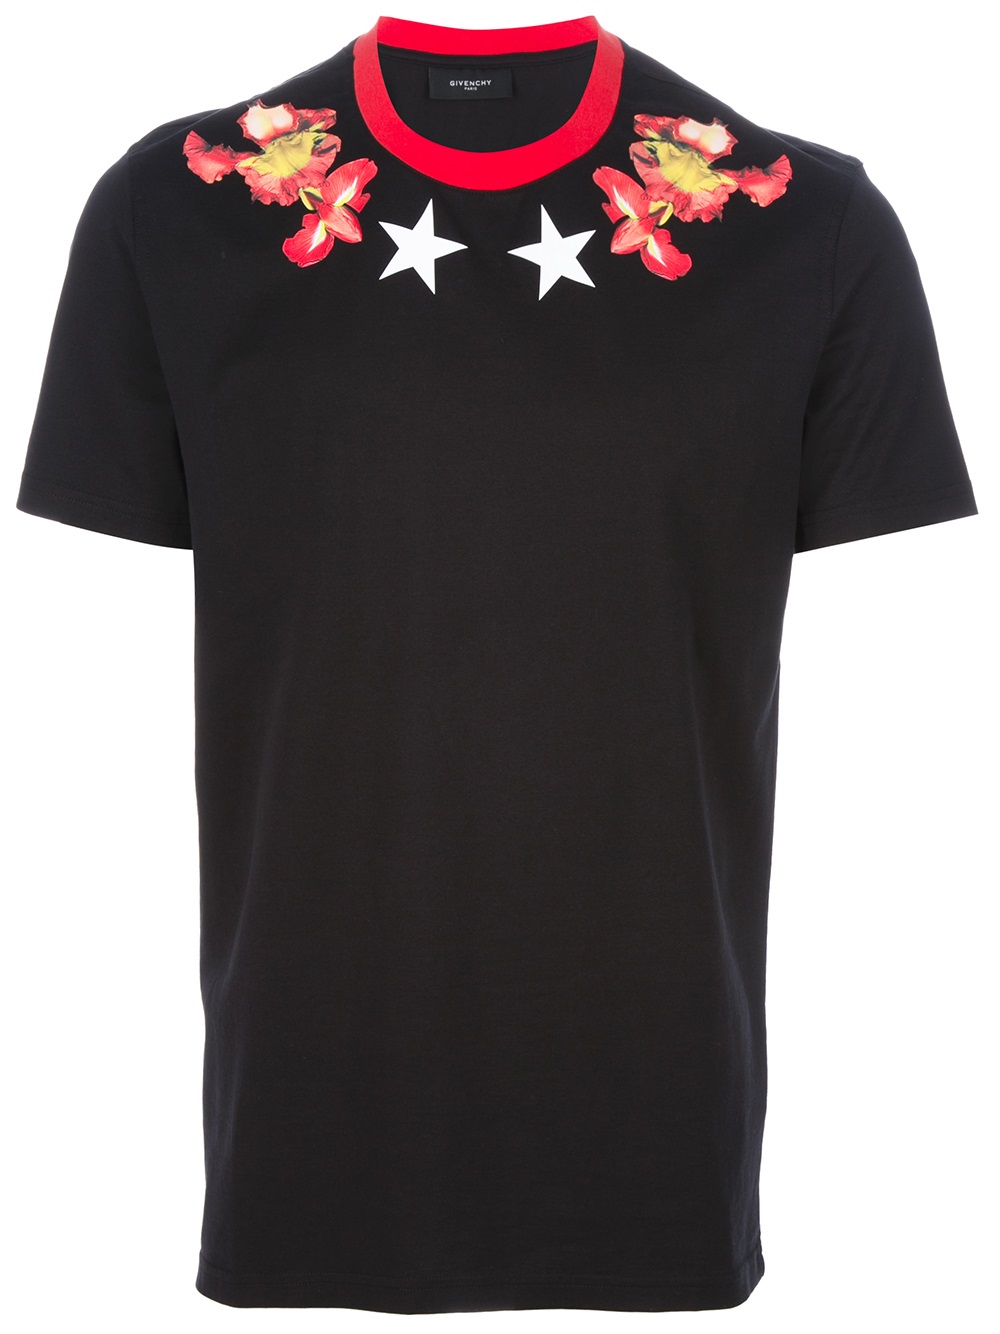 Lyst - Givenchy Floral Print Tshirt in Black for Men